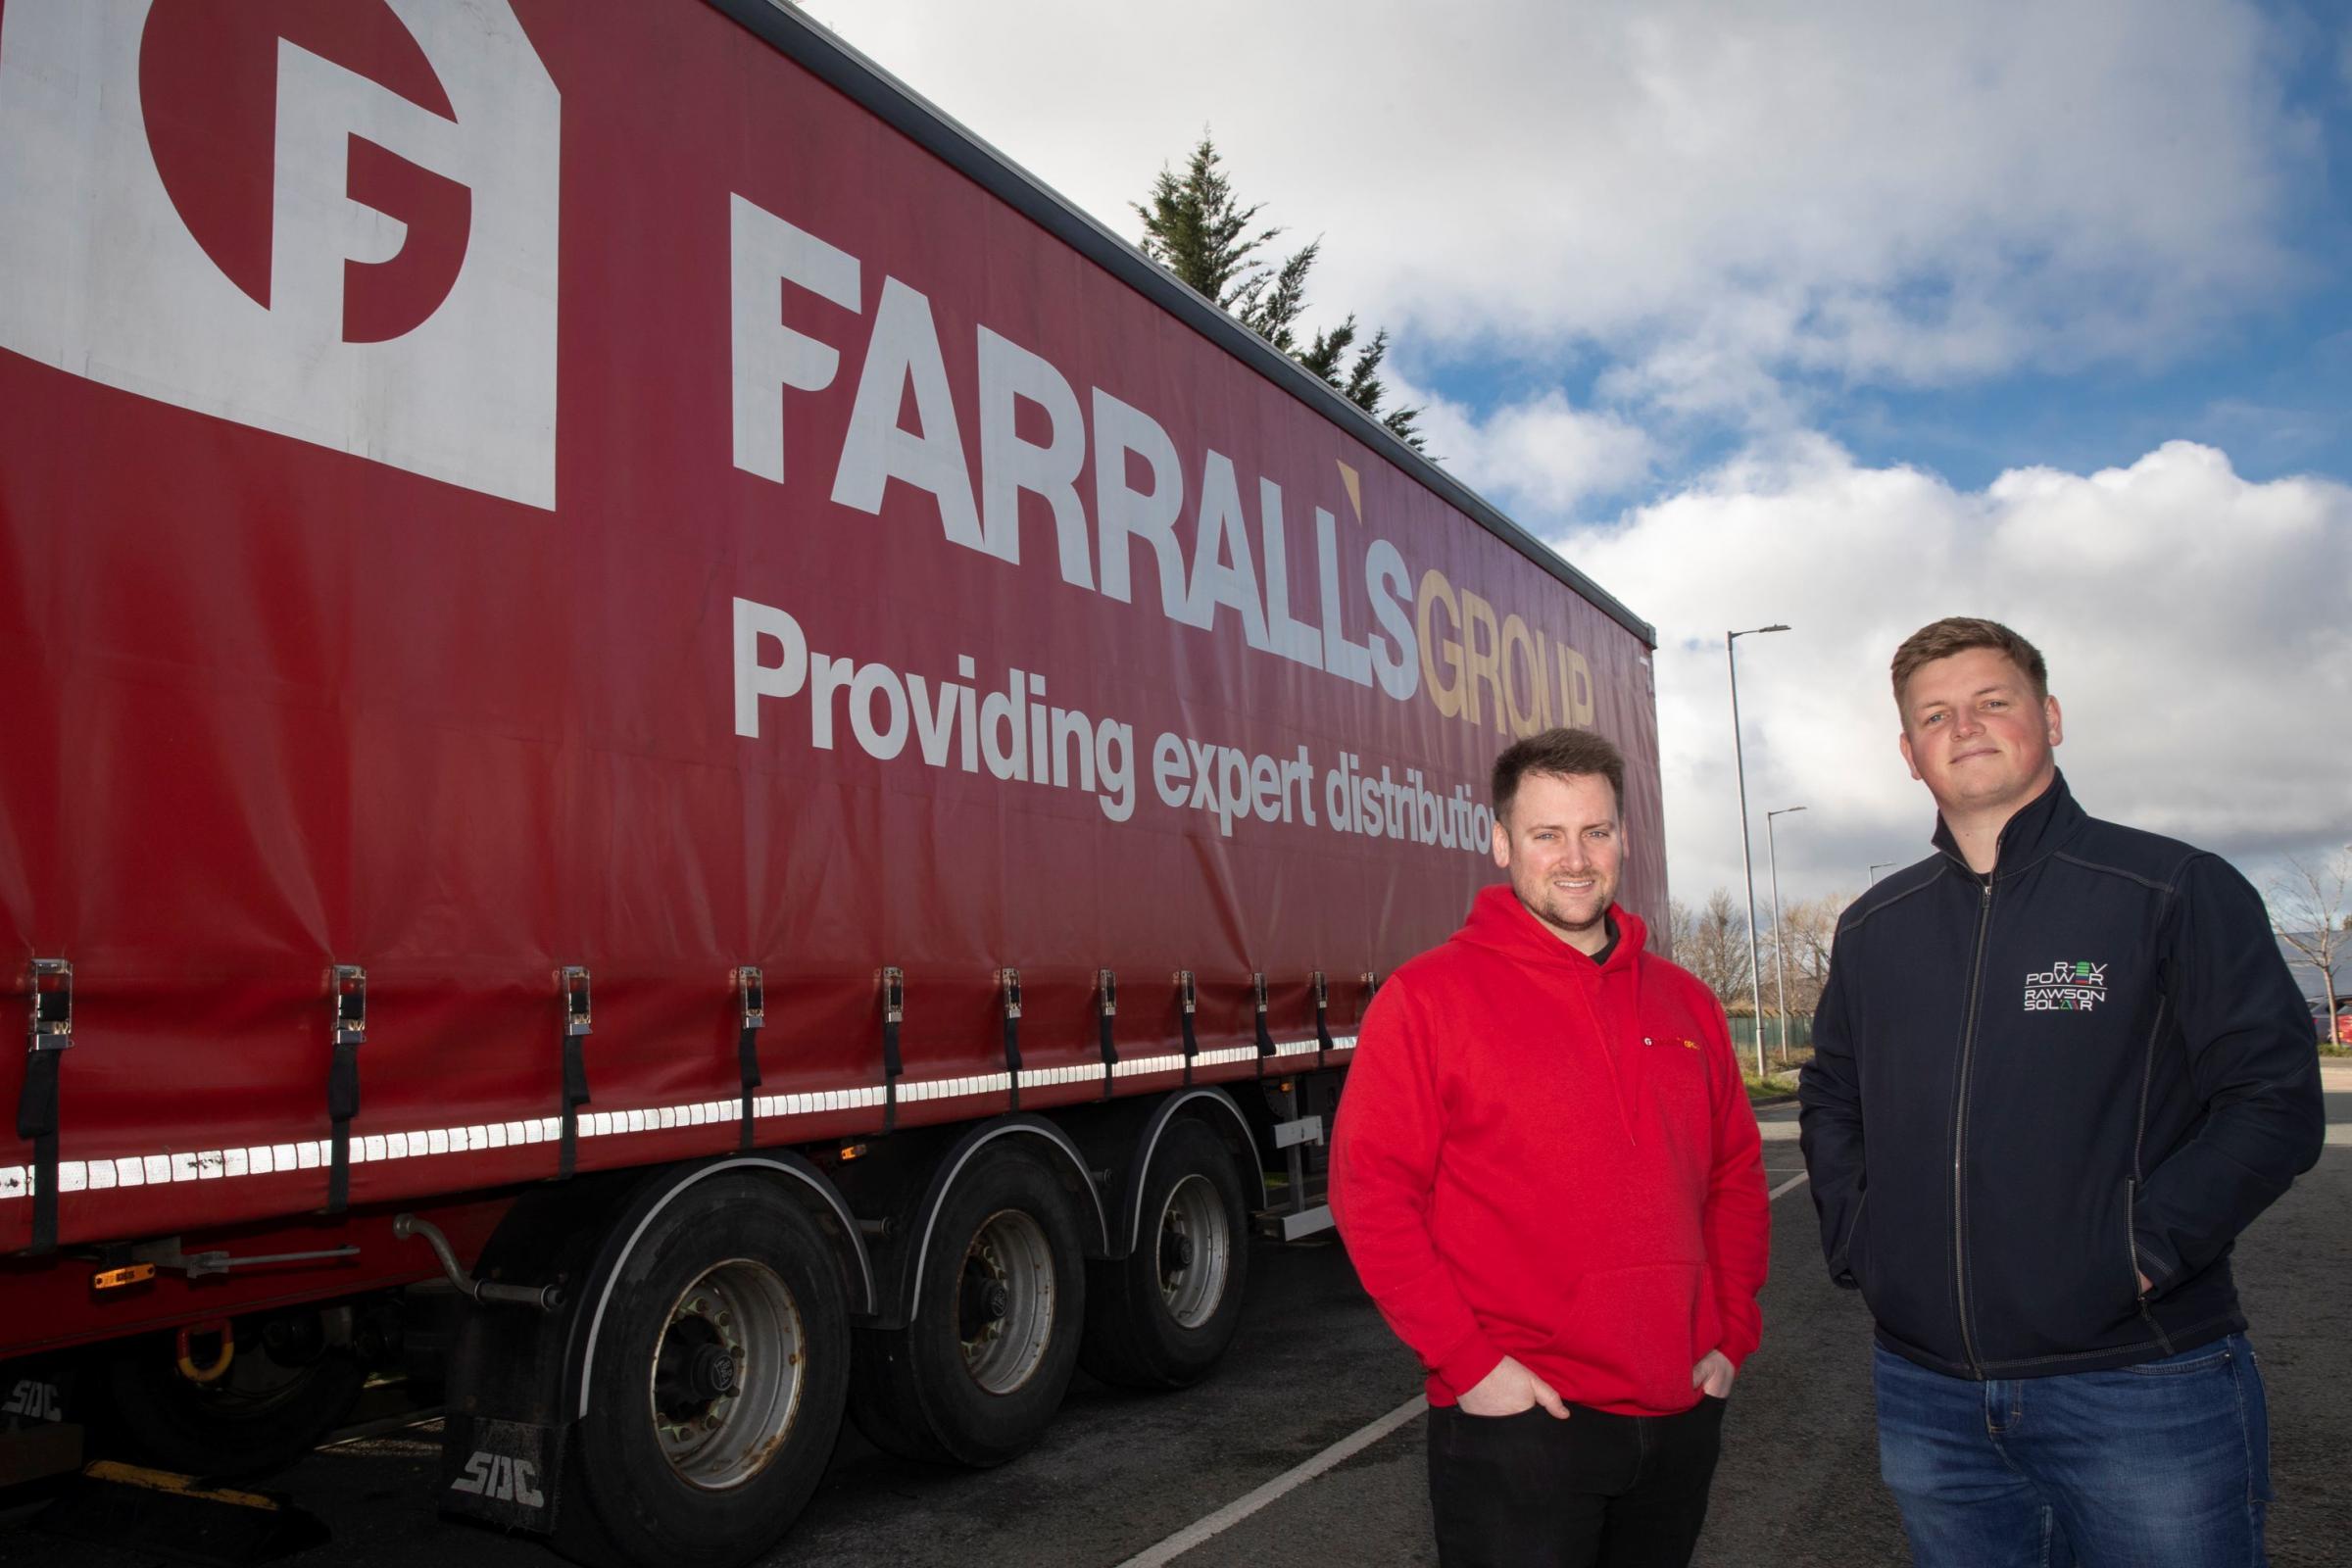 Farralls managing director Matt Farrall (left) with Gregg White, of Rawson Solar who have installed a 1,400-panel solar array at their Deeside HQ. Photo: Mandy Jones Photography